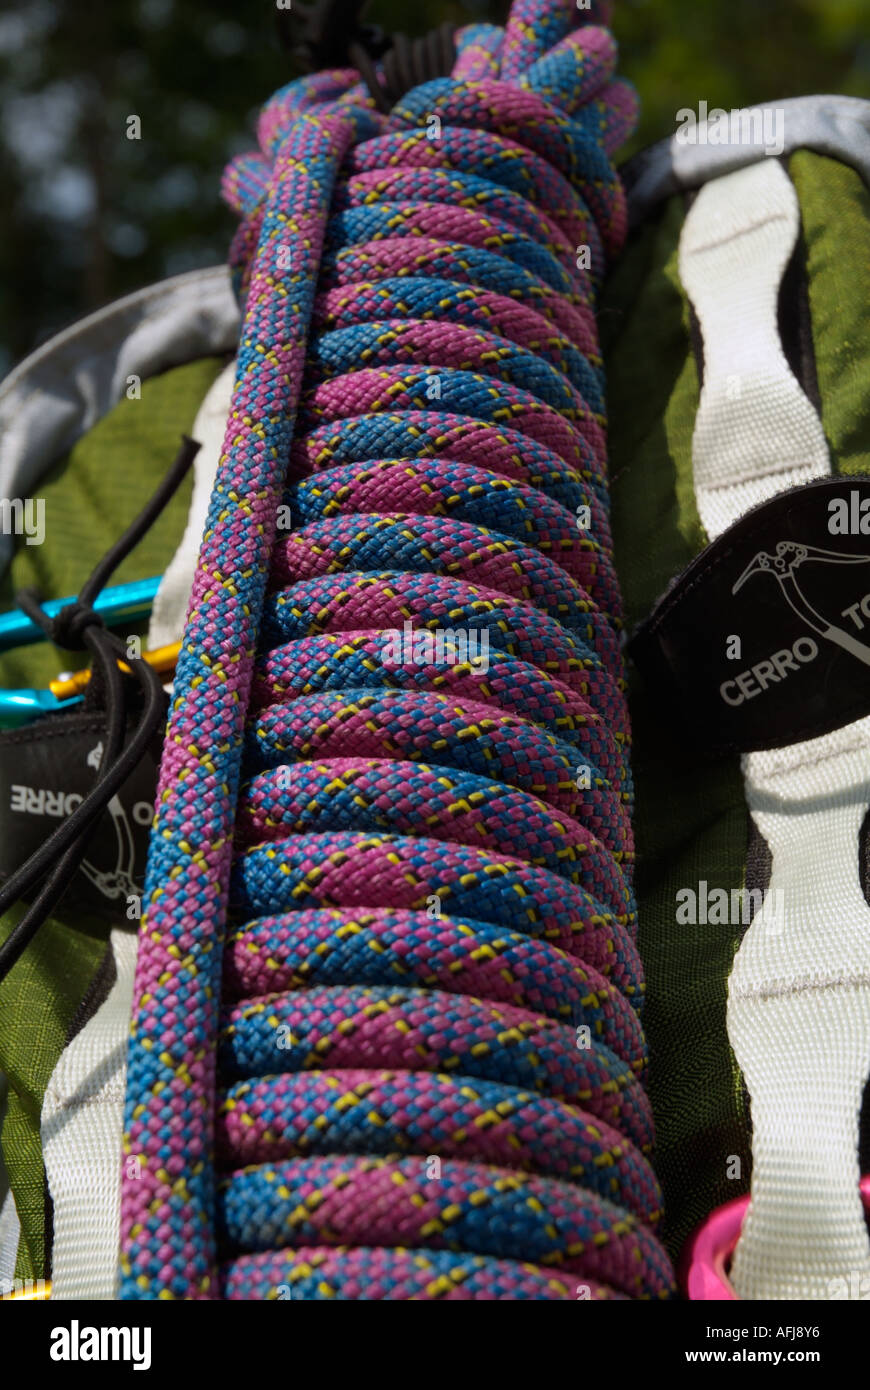 A purple climbing rope attached to a backpack Stock Photo - Alamy